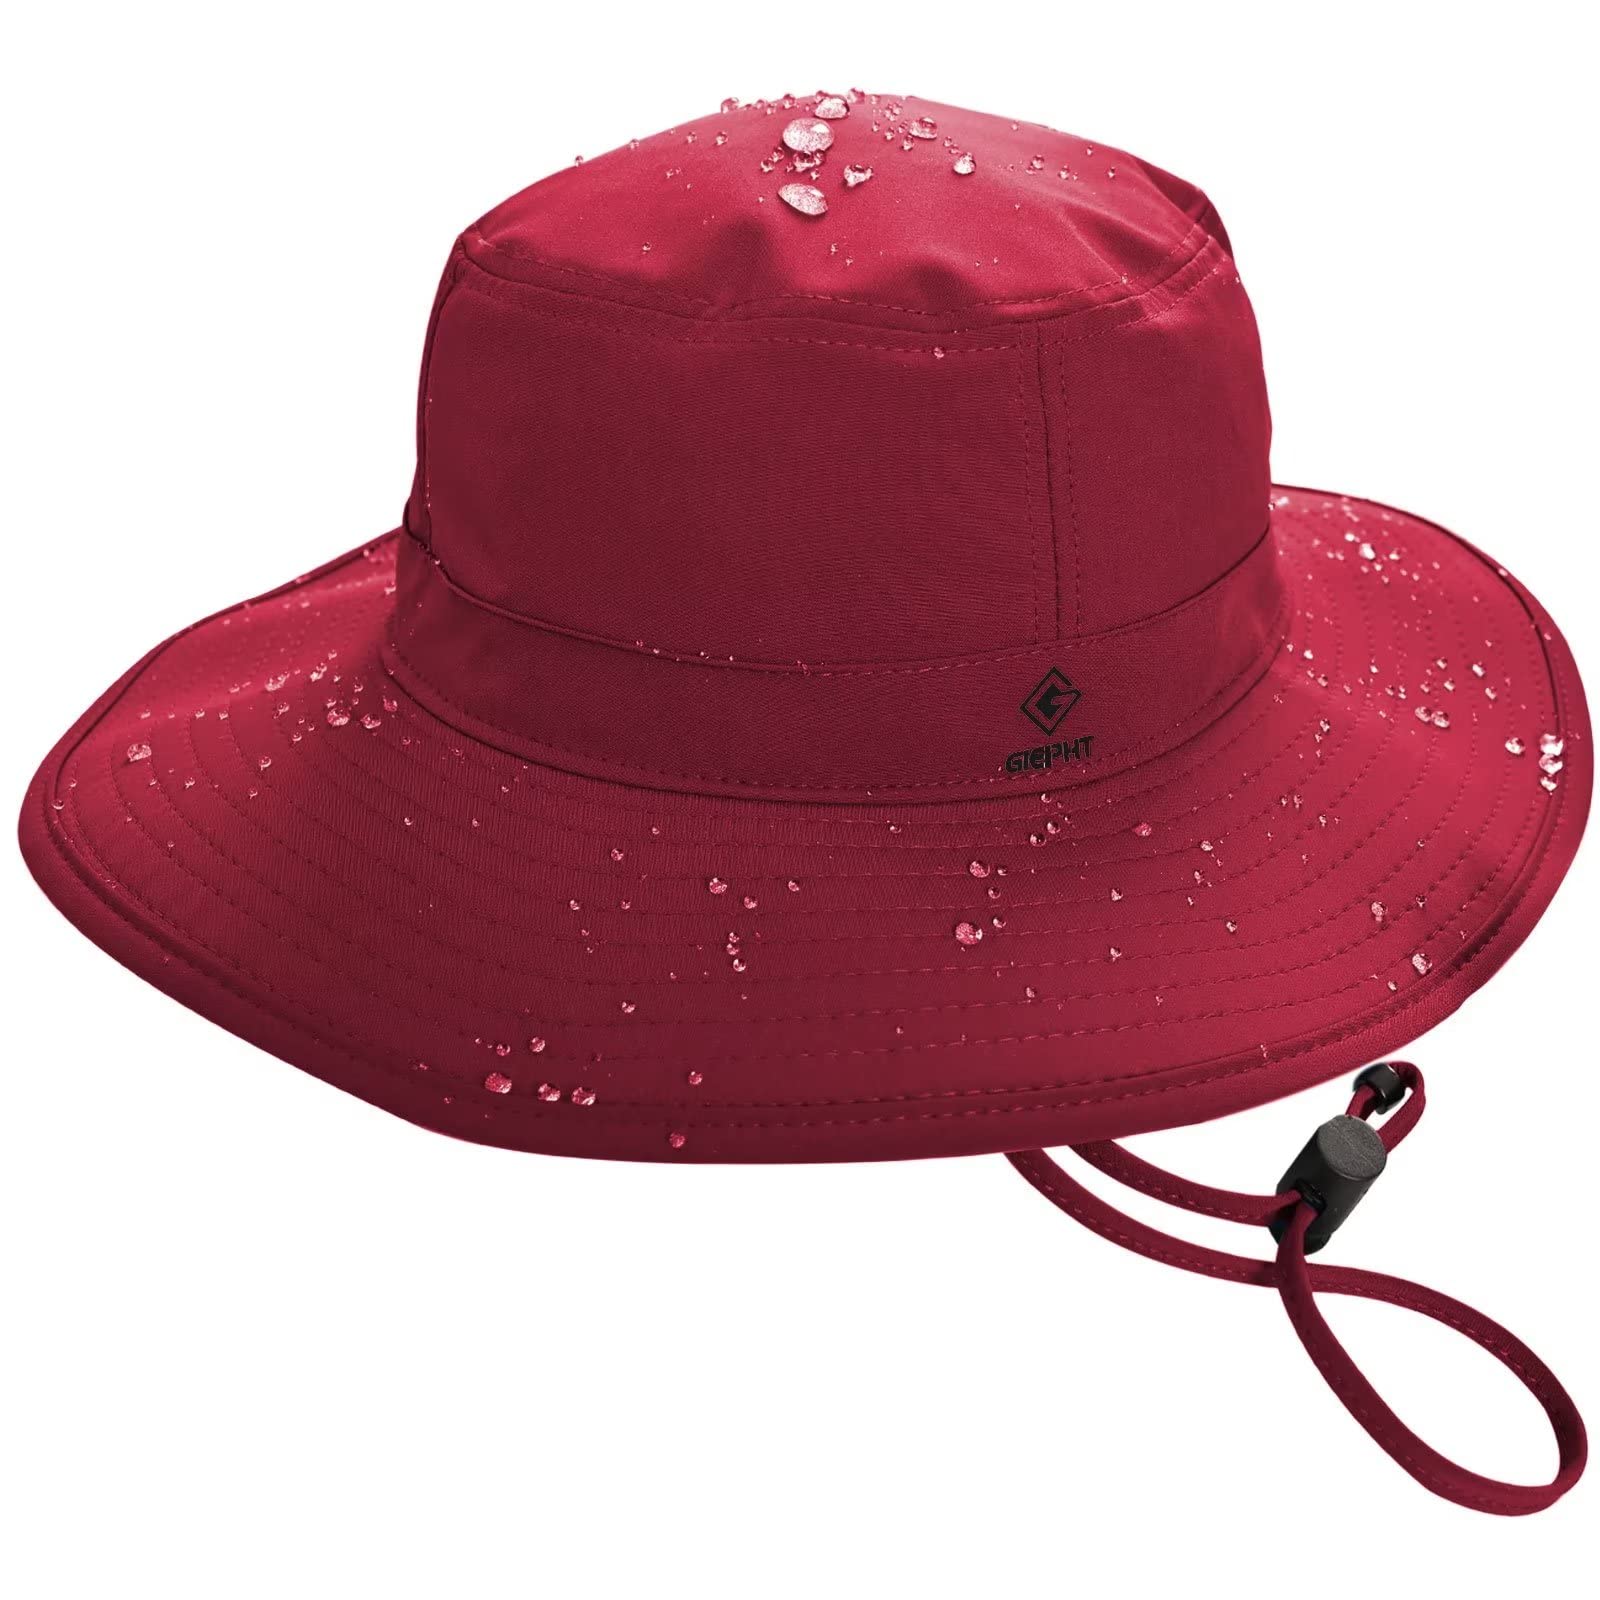 QingY Fishing Hat Sun UV Protection UPF 50+ Sun Hat Bucket Summer Men Women Large Wide Brim Bob Hiking Outdoor Hat with Chain Strap,Red Gray, adult